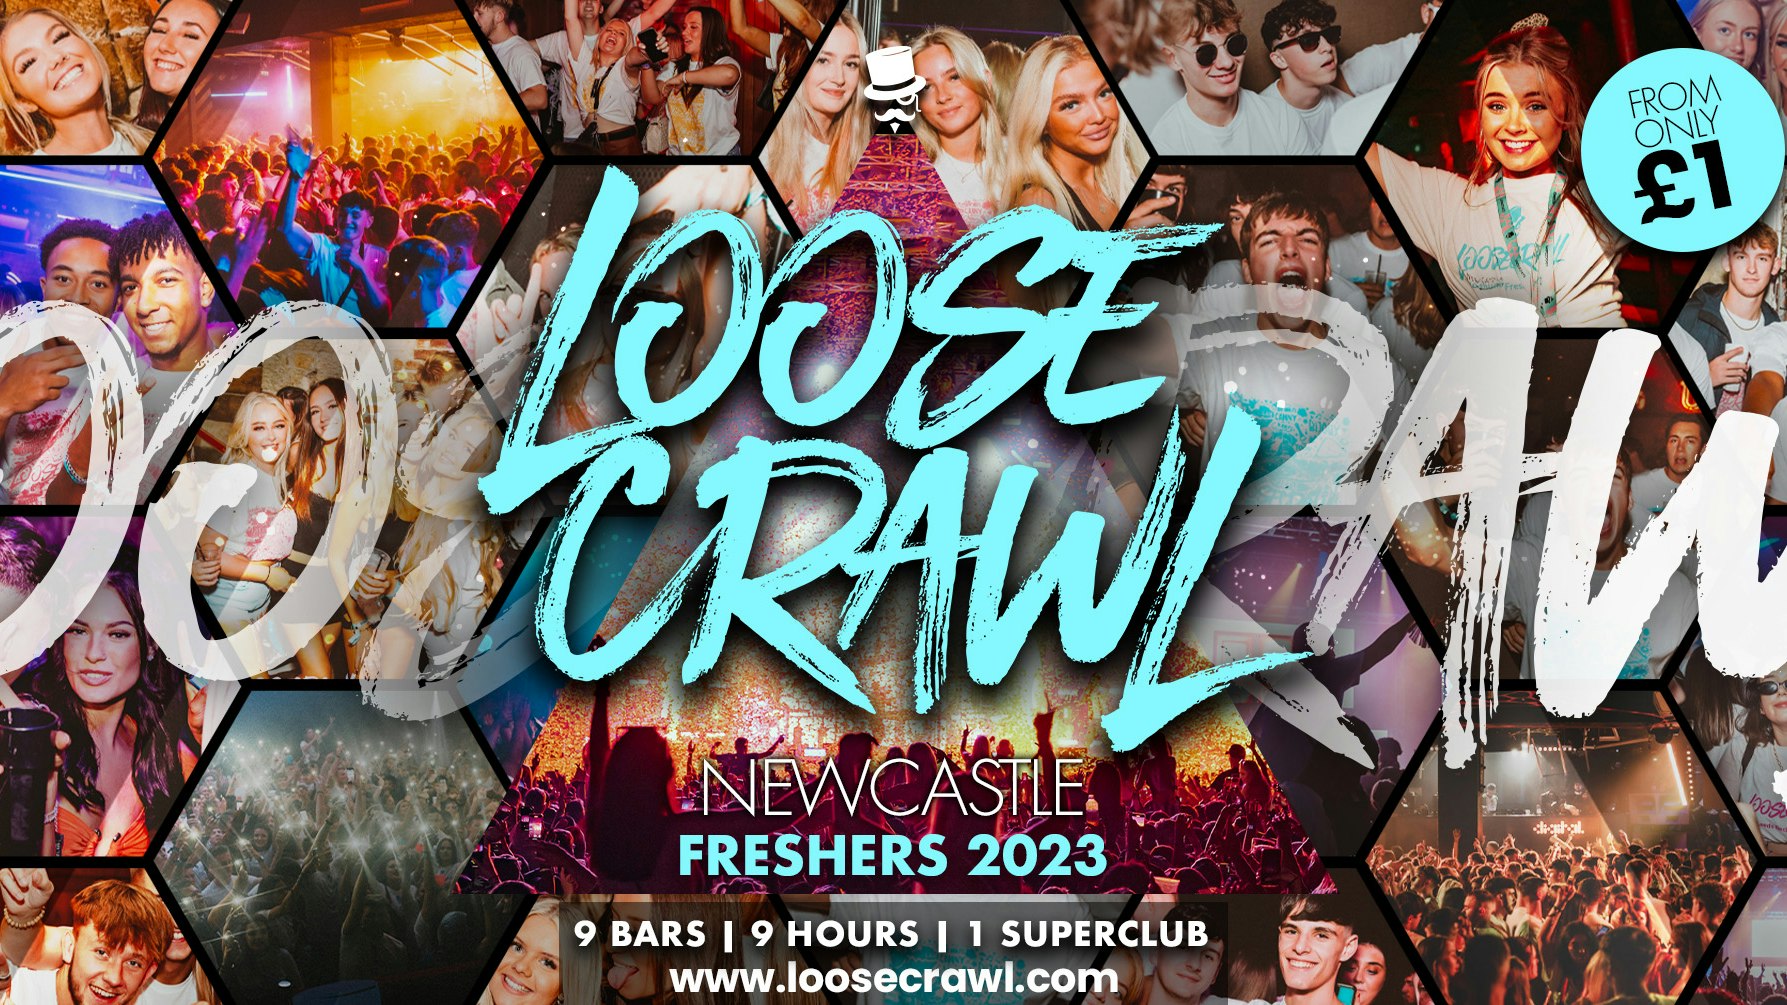 LOOSECRAWL NEWCASTLE – FINAL 150 TICKETS 95% SOLD OUT! | 3000 FRESHERS – 9 BARS – 9 HOURS – 1 SUPERCLUB! | TICKETS FROM £1 🥳  THE UKS CRAZIEST BAR CRAWL